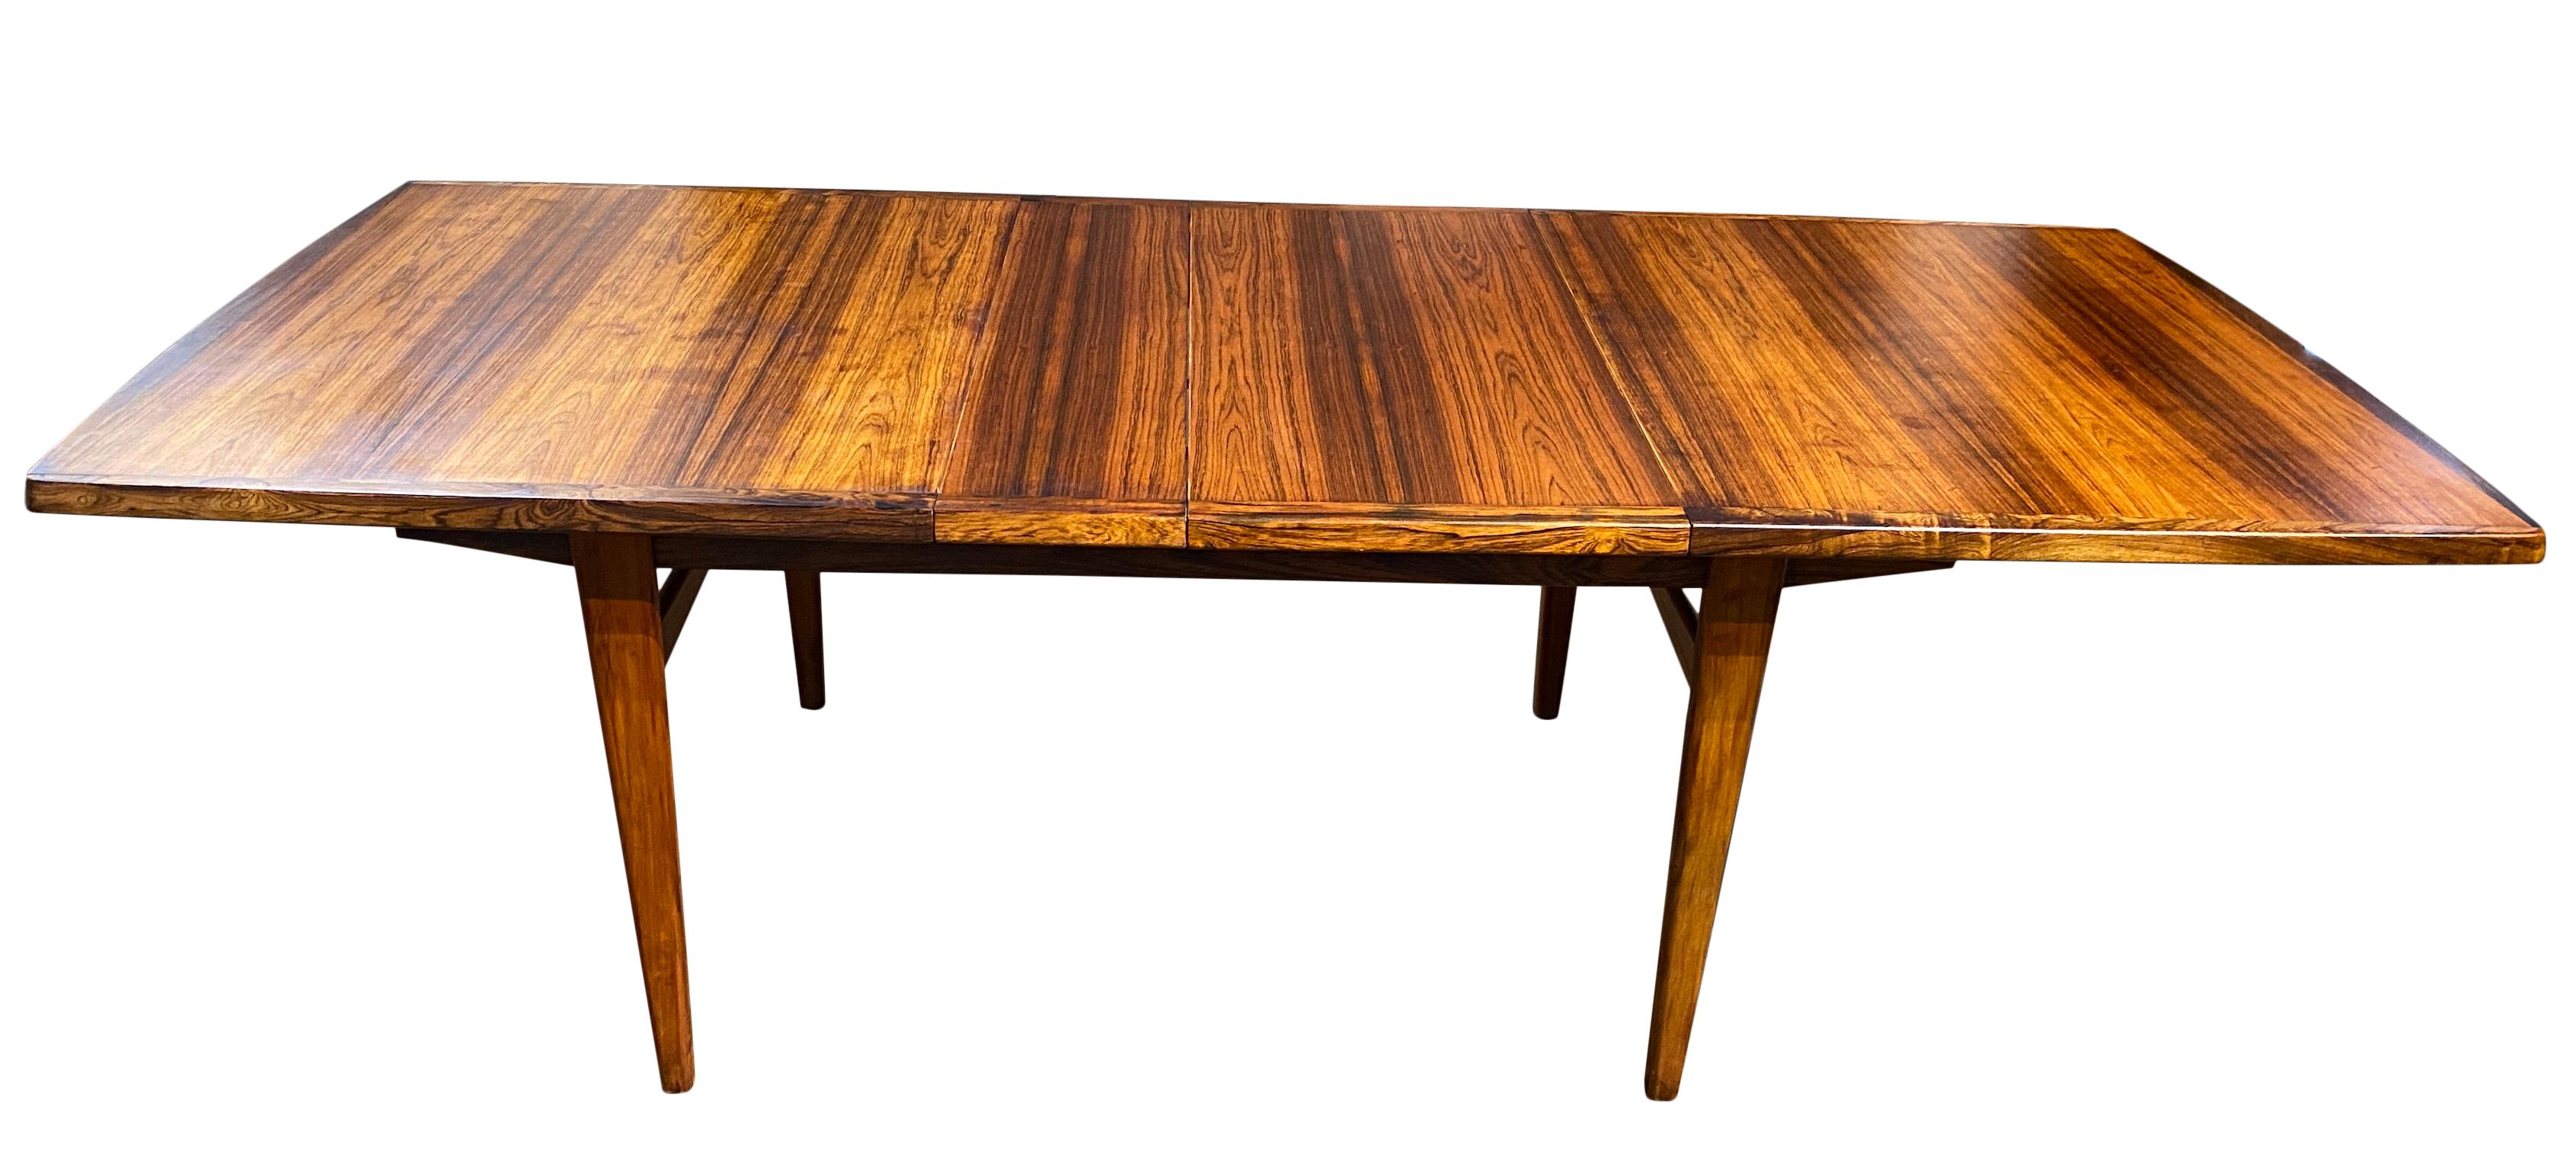 Stunning Midcentury rosewood expandable dining table with 2 nesting leaves. This is a beautiful dining table Made in Denmark. Amazing solid rosewood legs and Woodwork on table is beautiful. Made, circa 1960. Original finish in excellent condition.